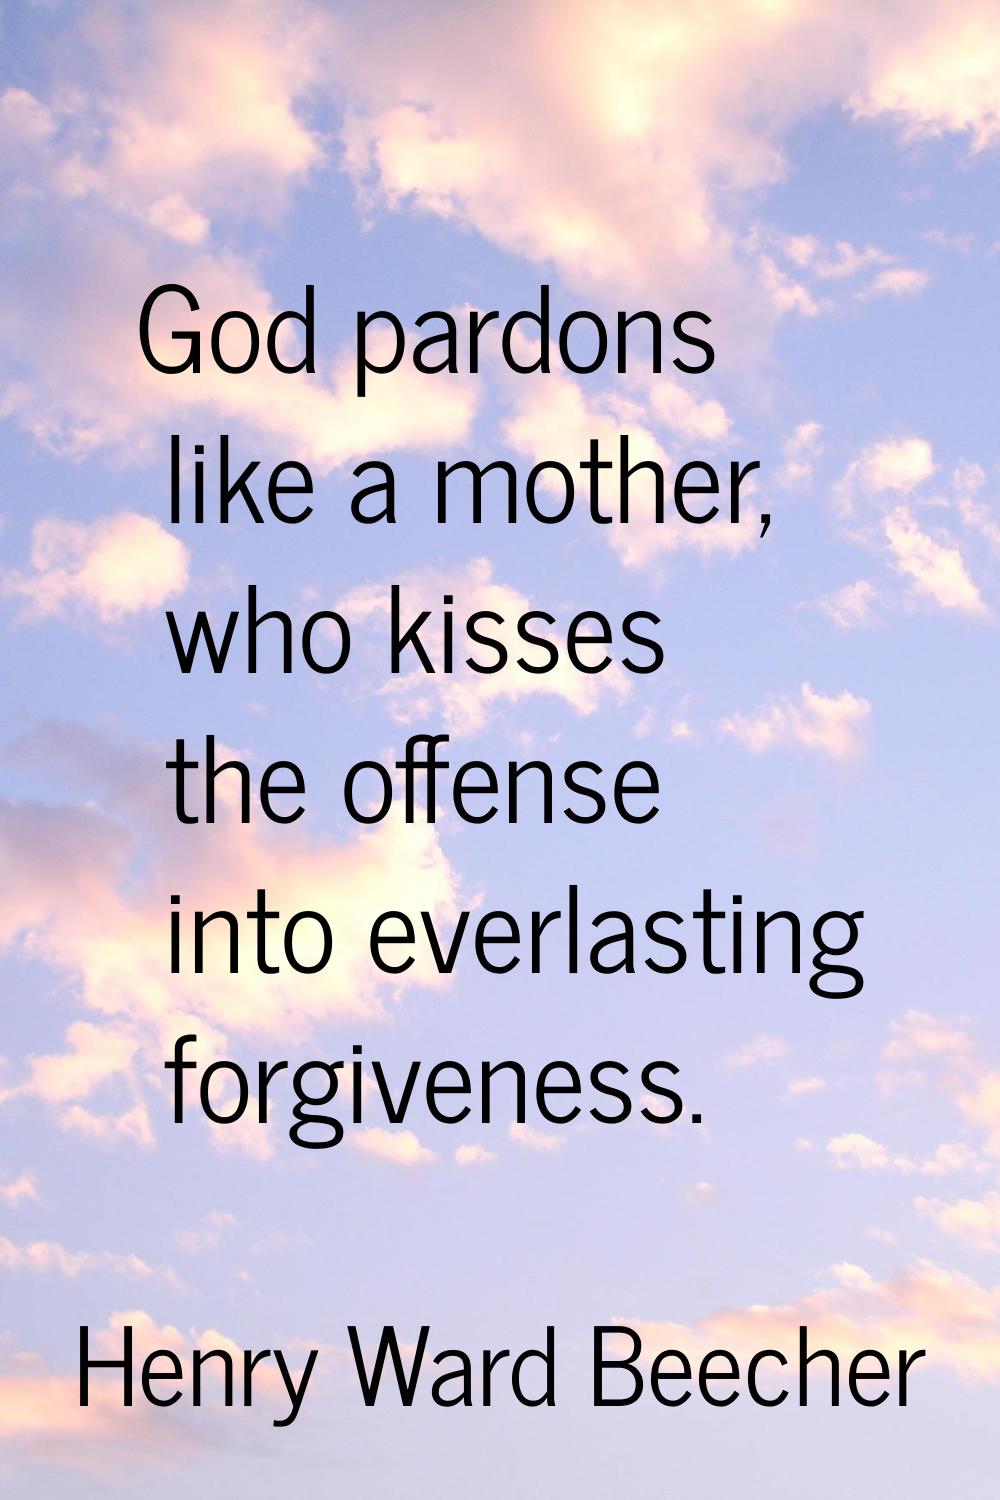 God pardons like a mother, who kisses the offense into everlasting forgiveness.